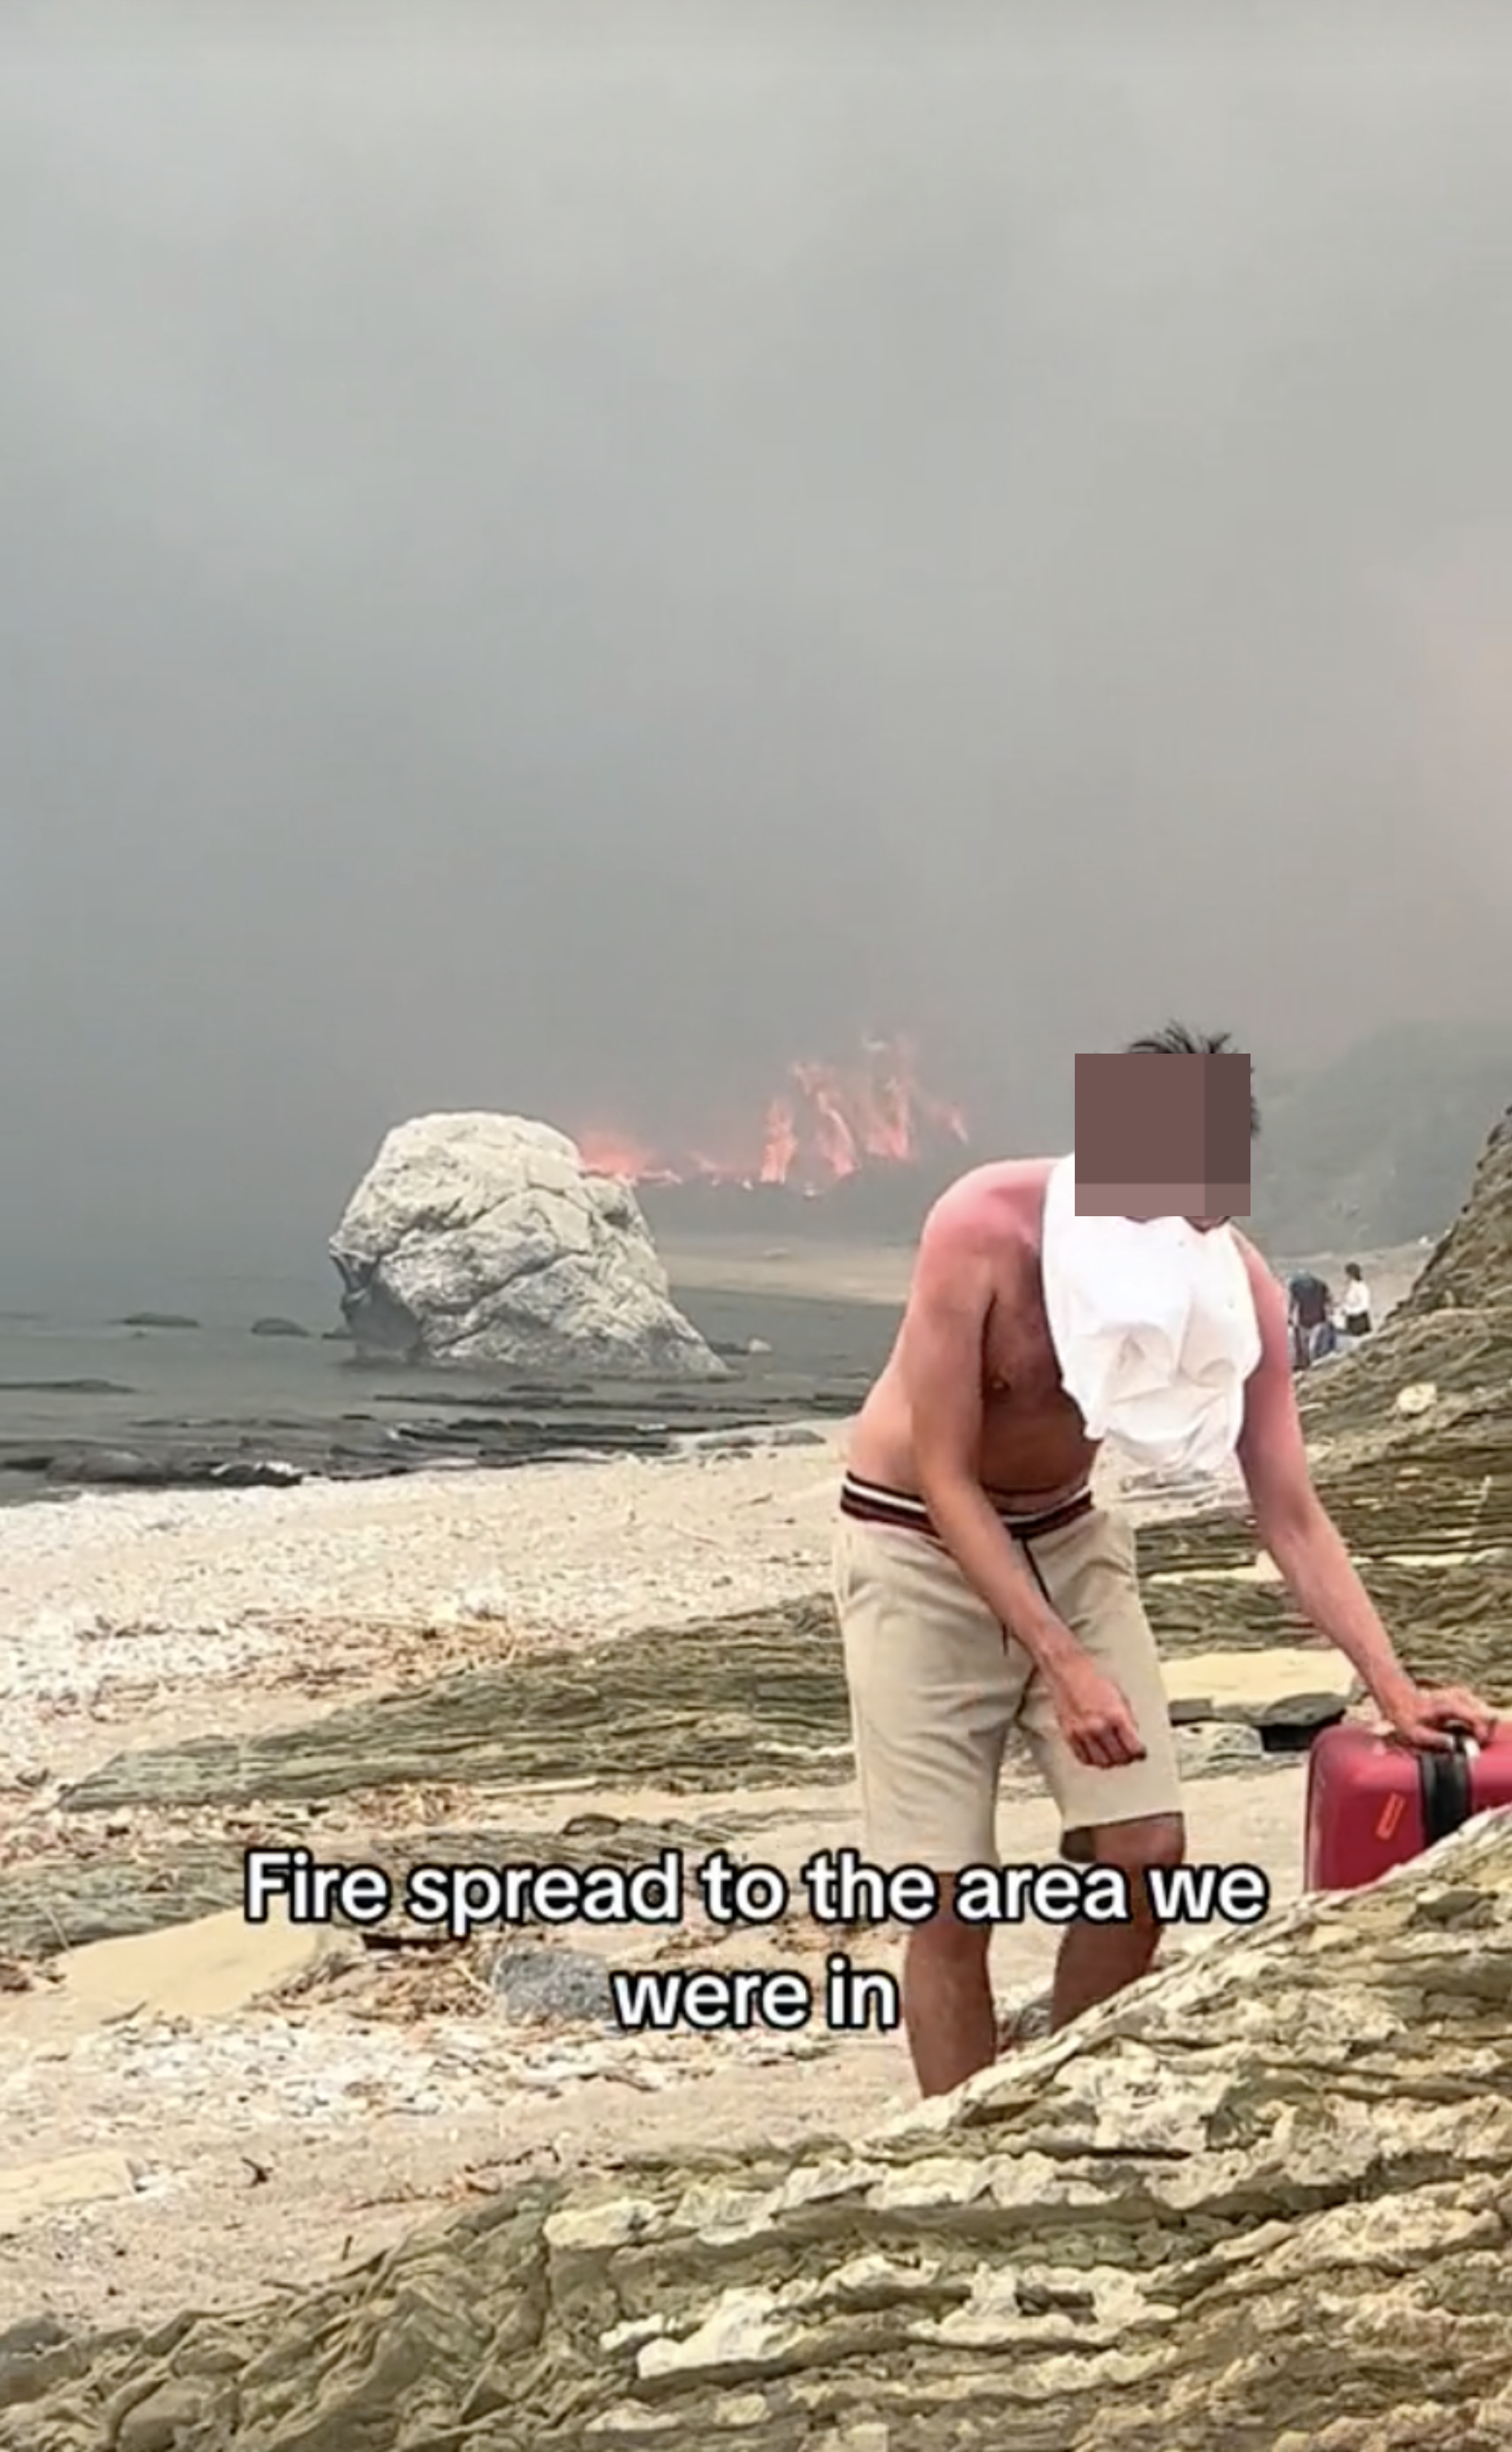 &quot;Fire spread to the area we were in&quot;